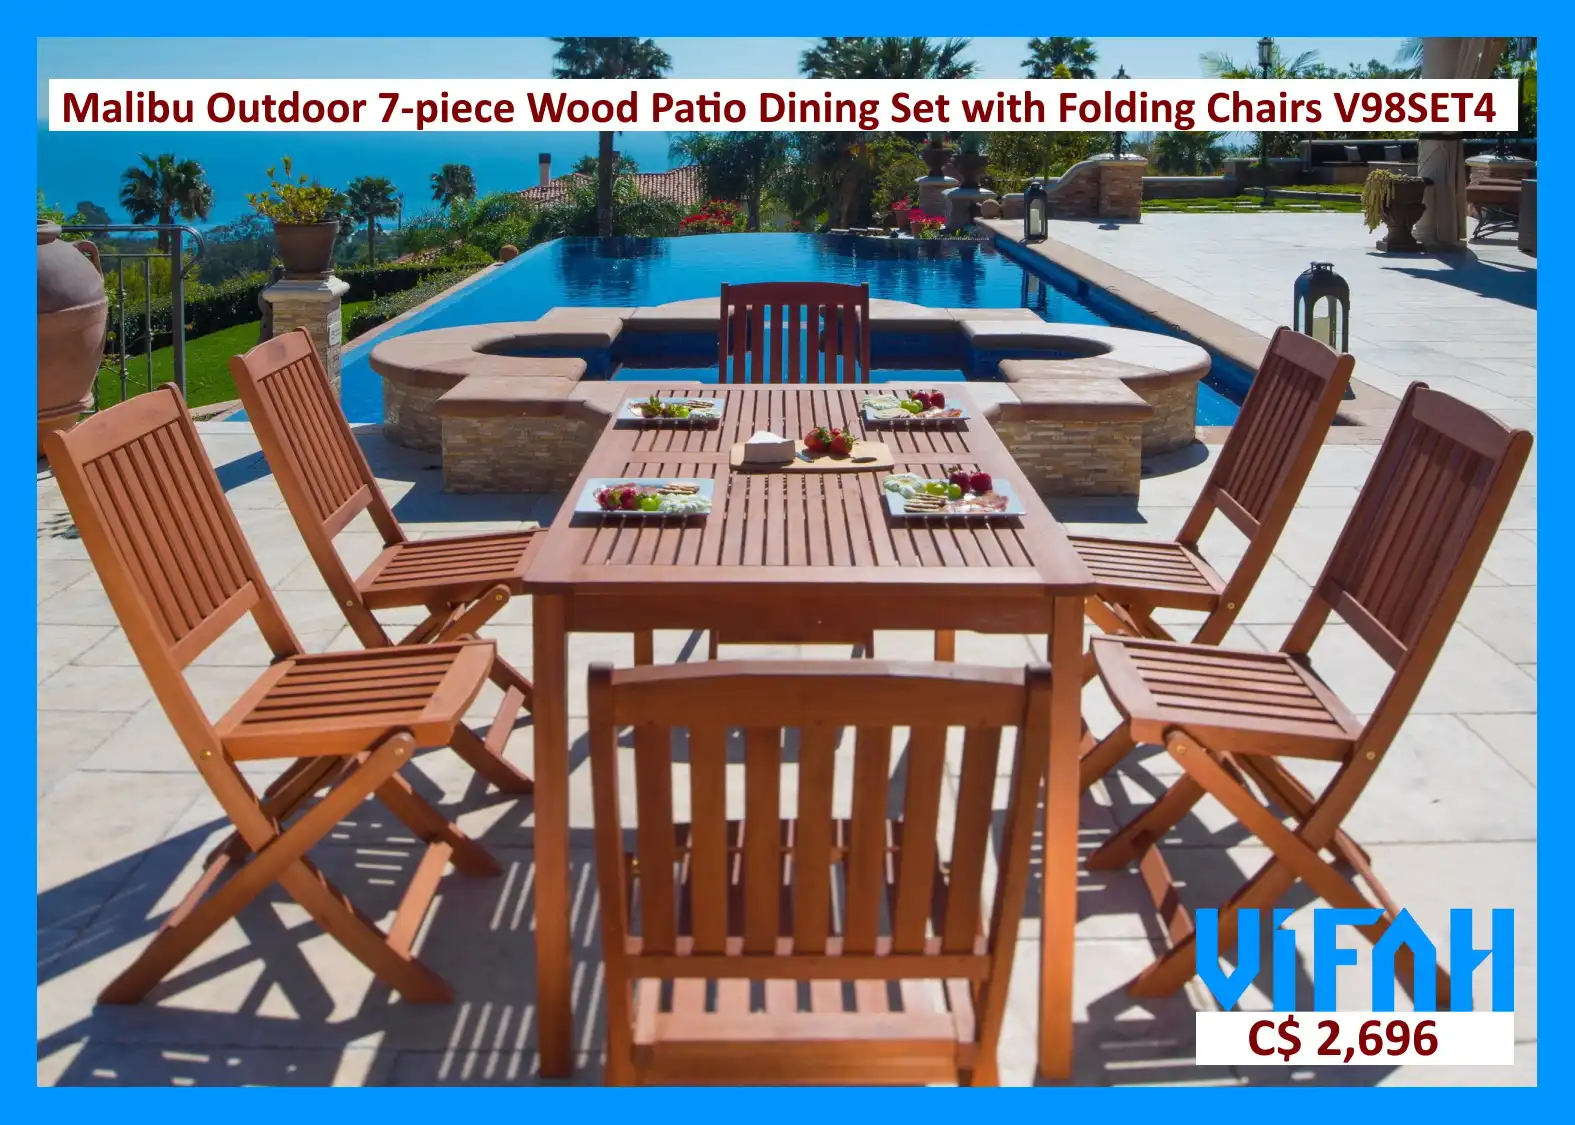 MALIBU Outdoor #V98SET04 7-piece Wood Patio Dining Set with Folding Chairs